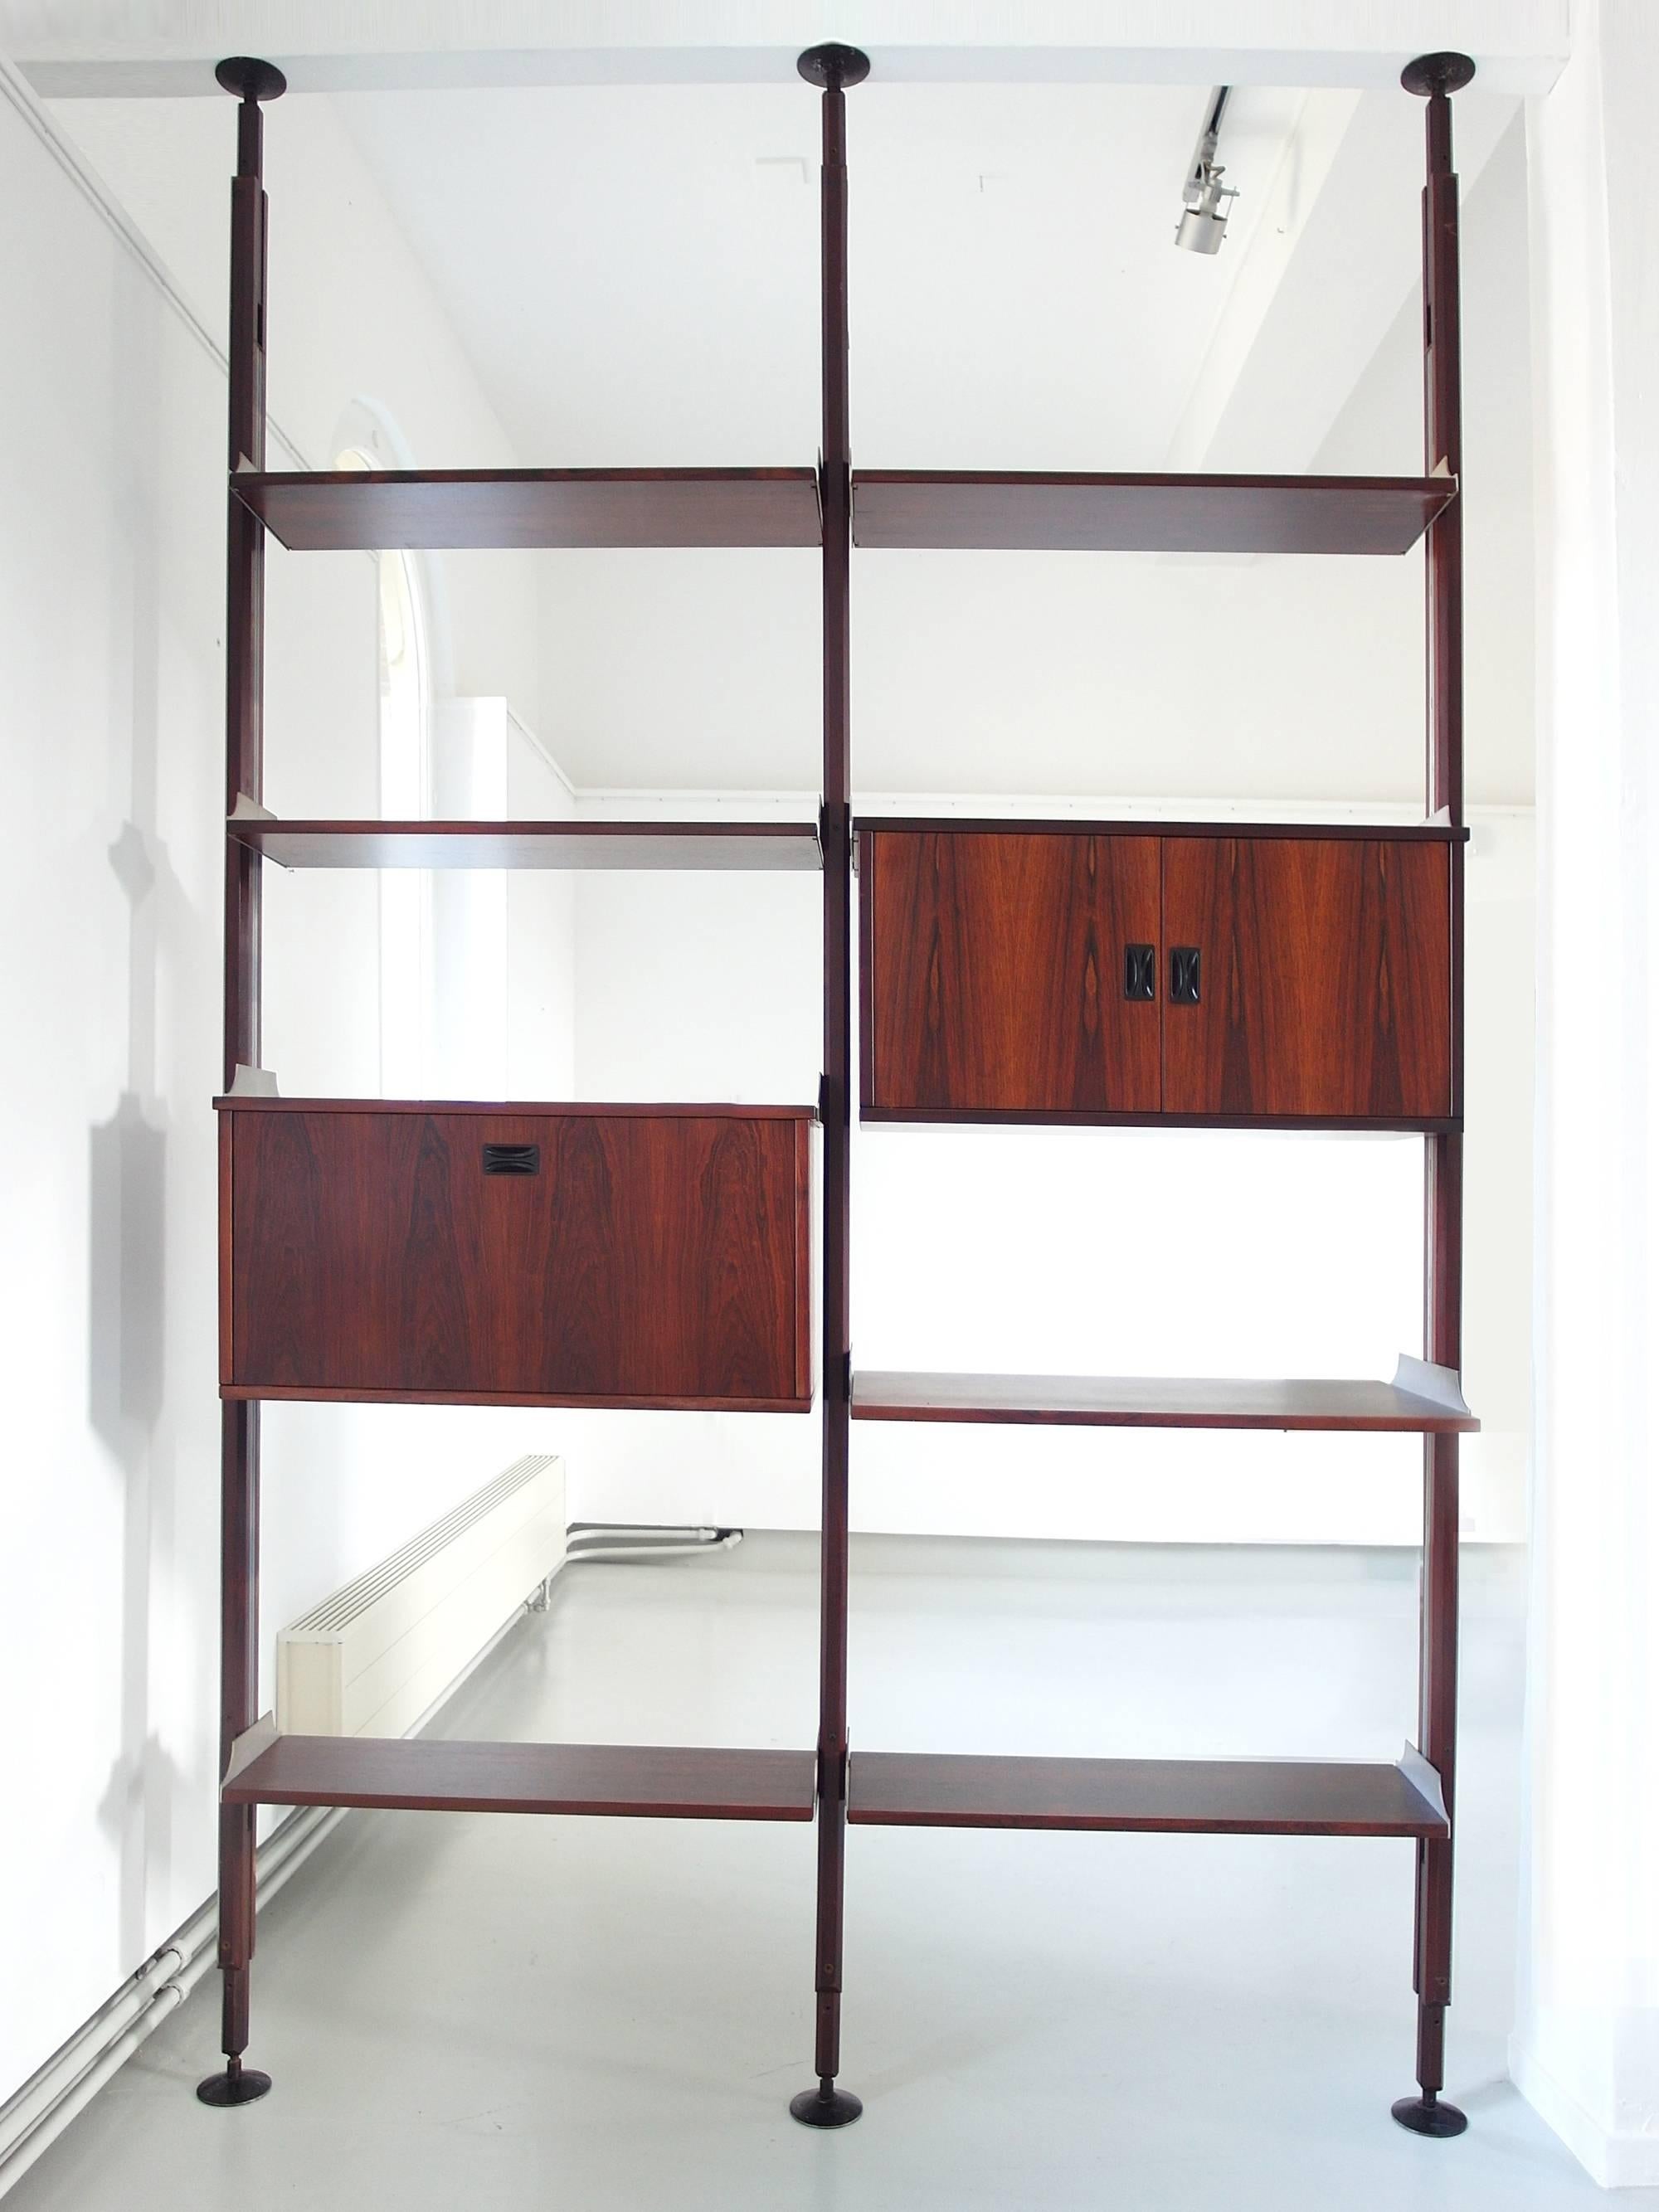 A beautiful shelving system by Stildomus, Italy, circa 1960. The library is composed of five small shelves, a large bookshelf and two cabinets, all made of luxury Caviuna hardwood. The shelves and cabinets can be composed easily according to your